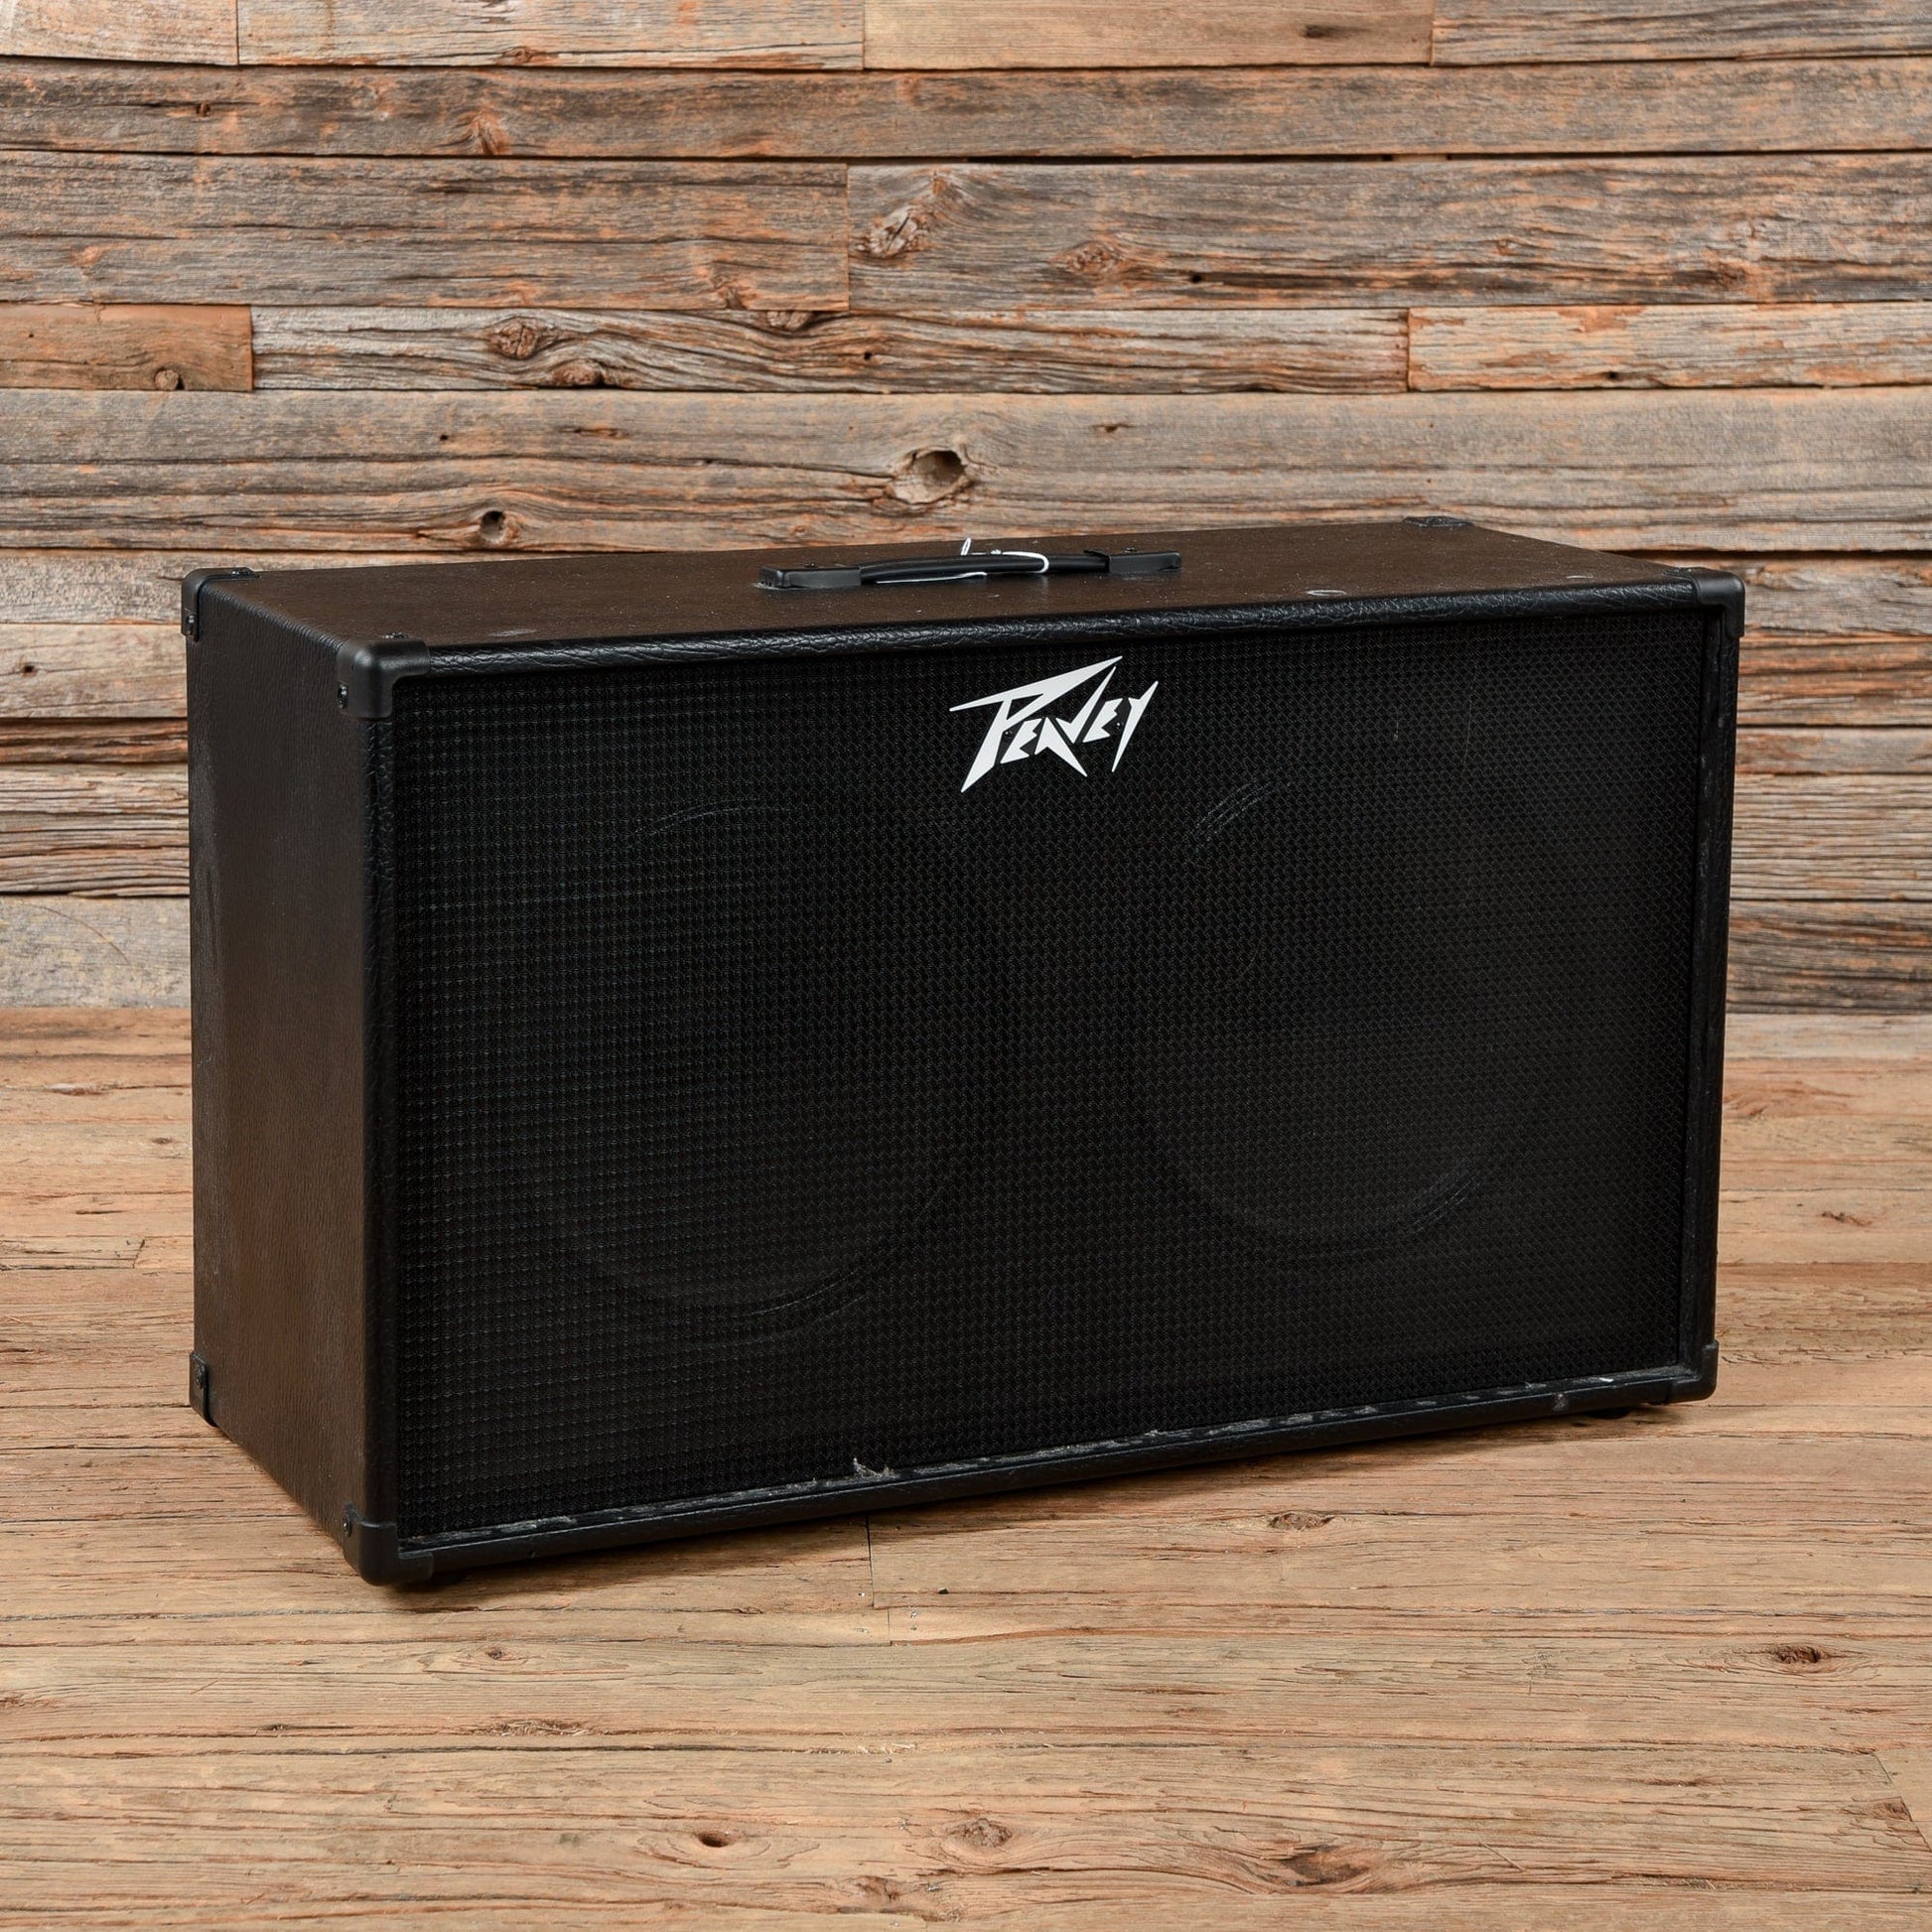 Peavey 2x12 Guitar Cabinet Amps / Guitar Cabinets